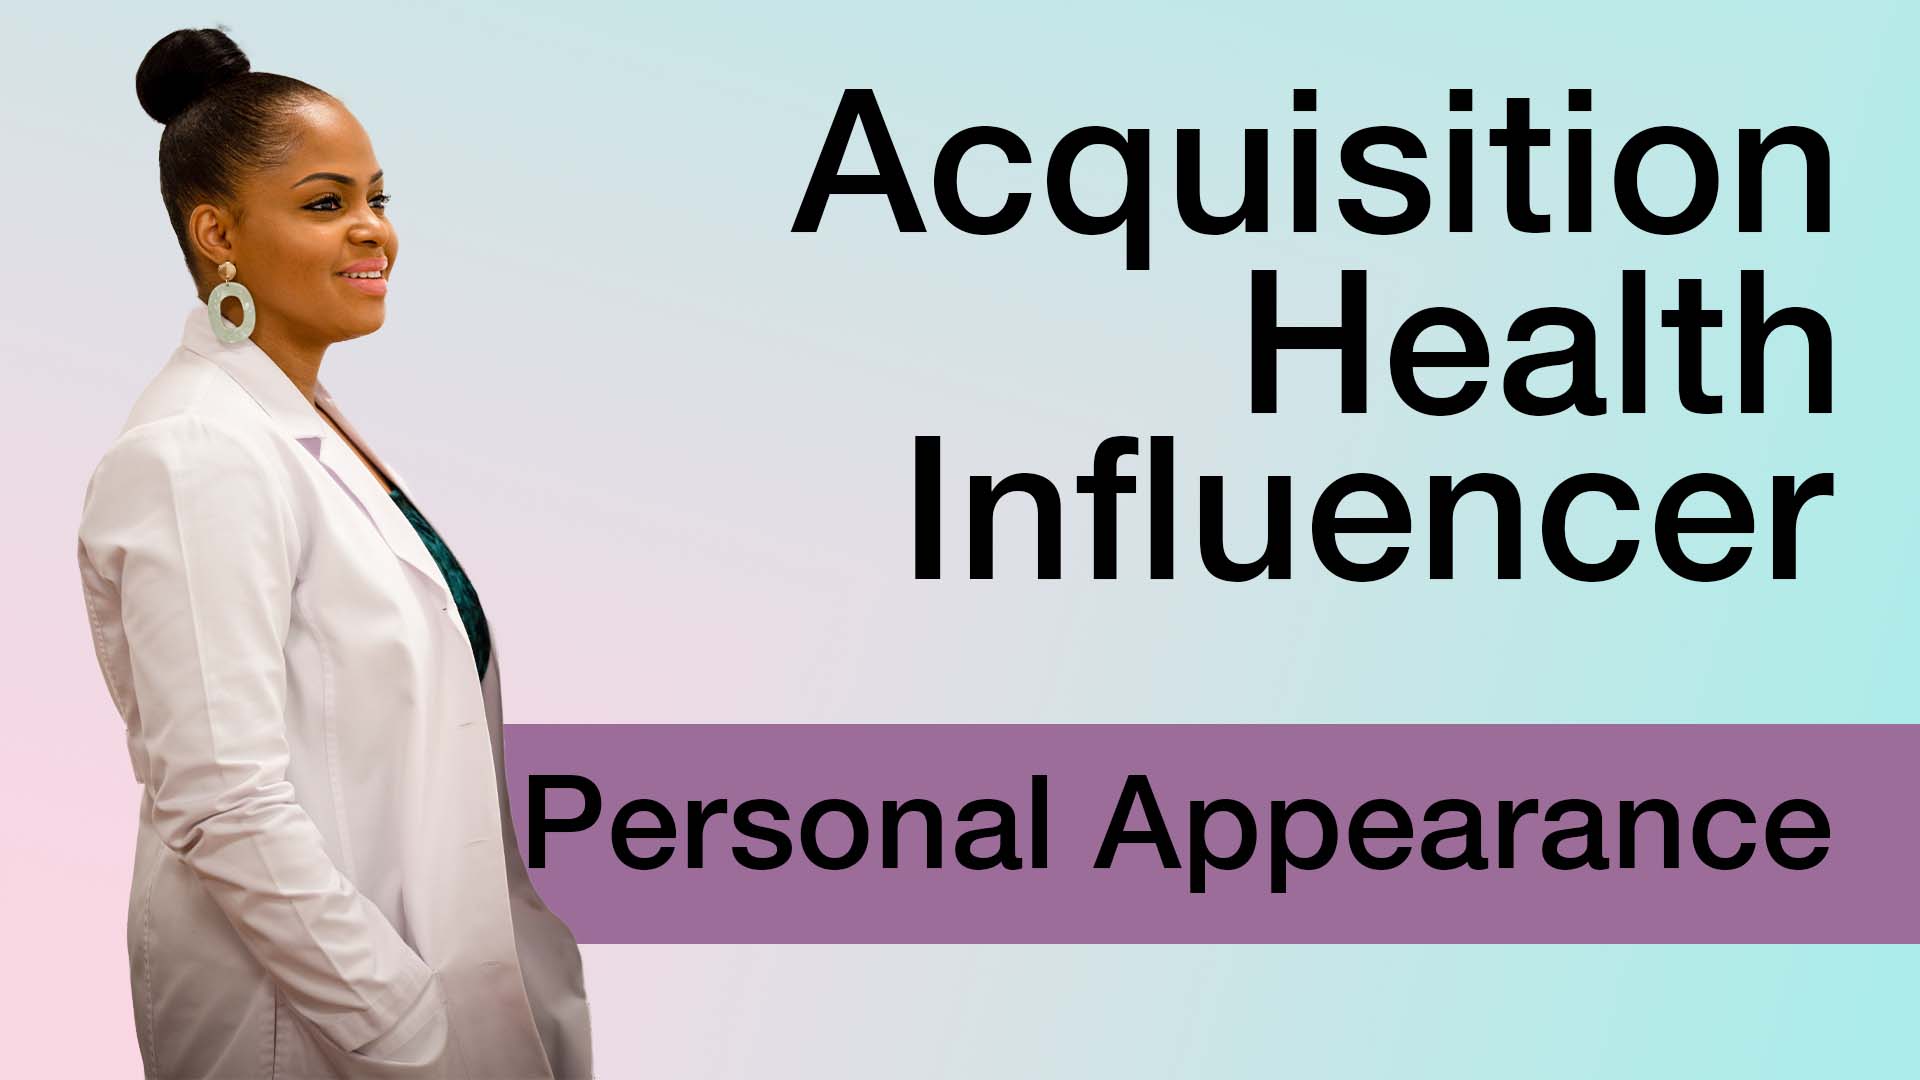 HEALTH Influencer Marketing inkl. Personal Appearance